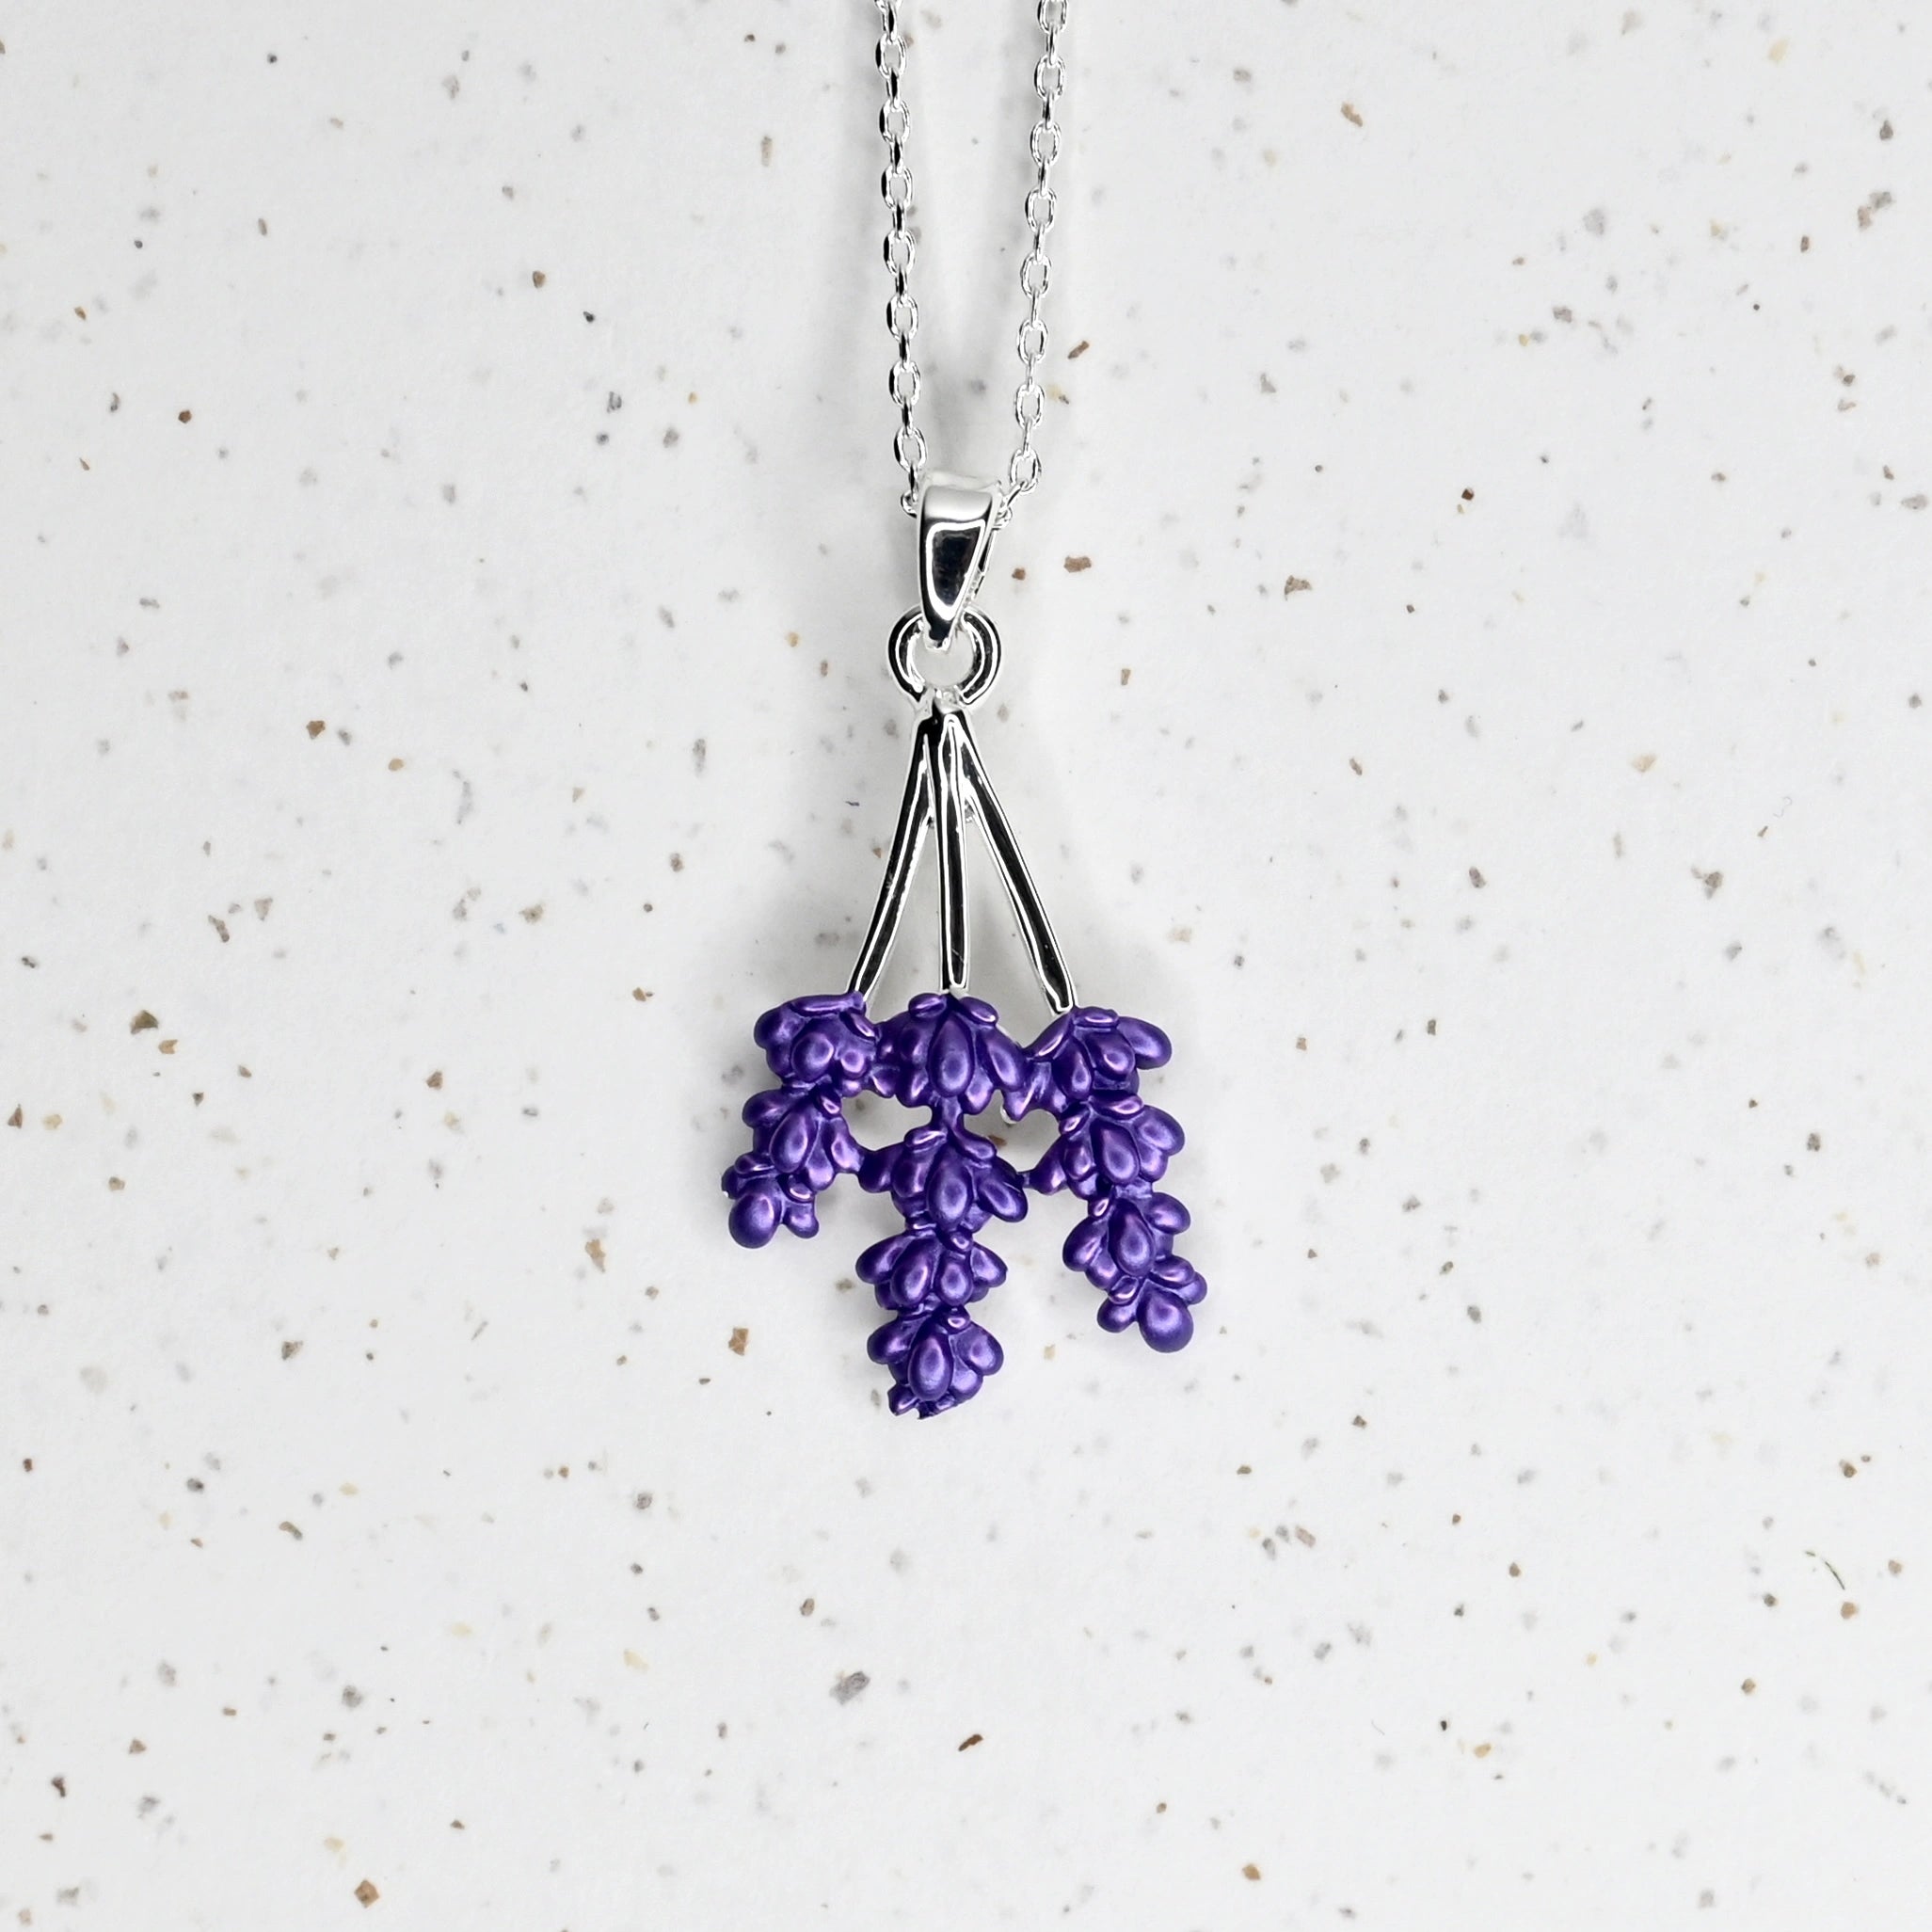 Handcrafted Lavender Necklace in Silver